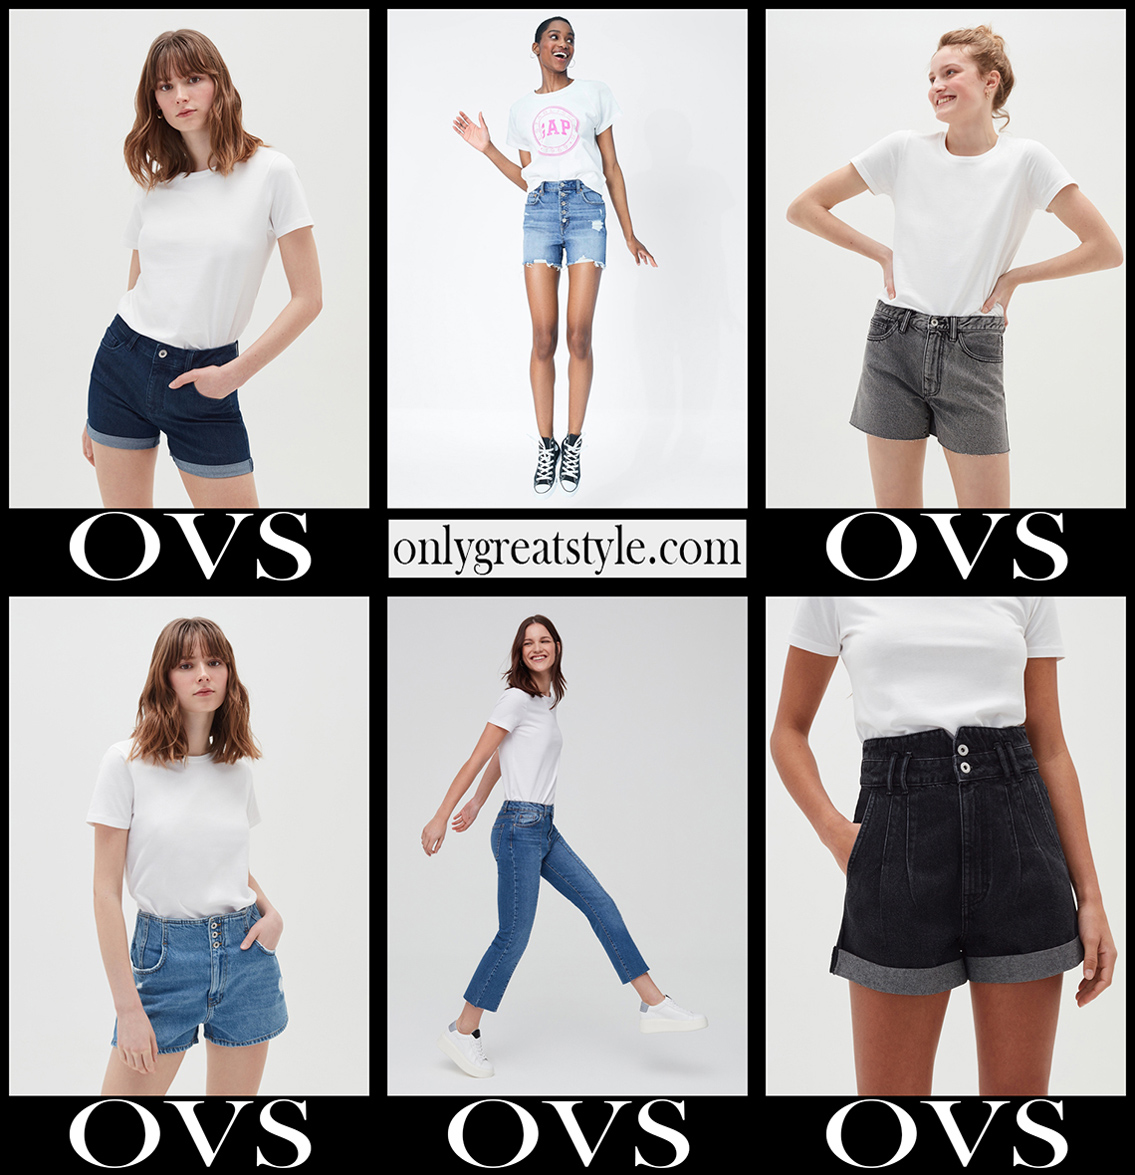 OVS jeans 2021 new arrivals womens clothing denim